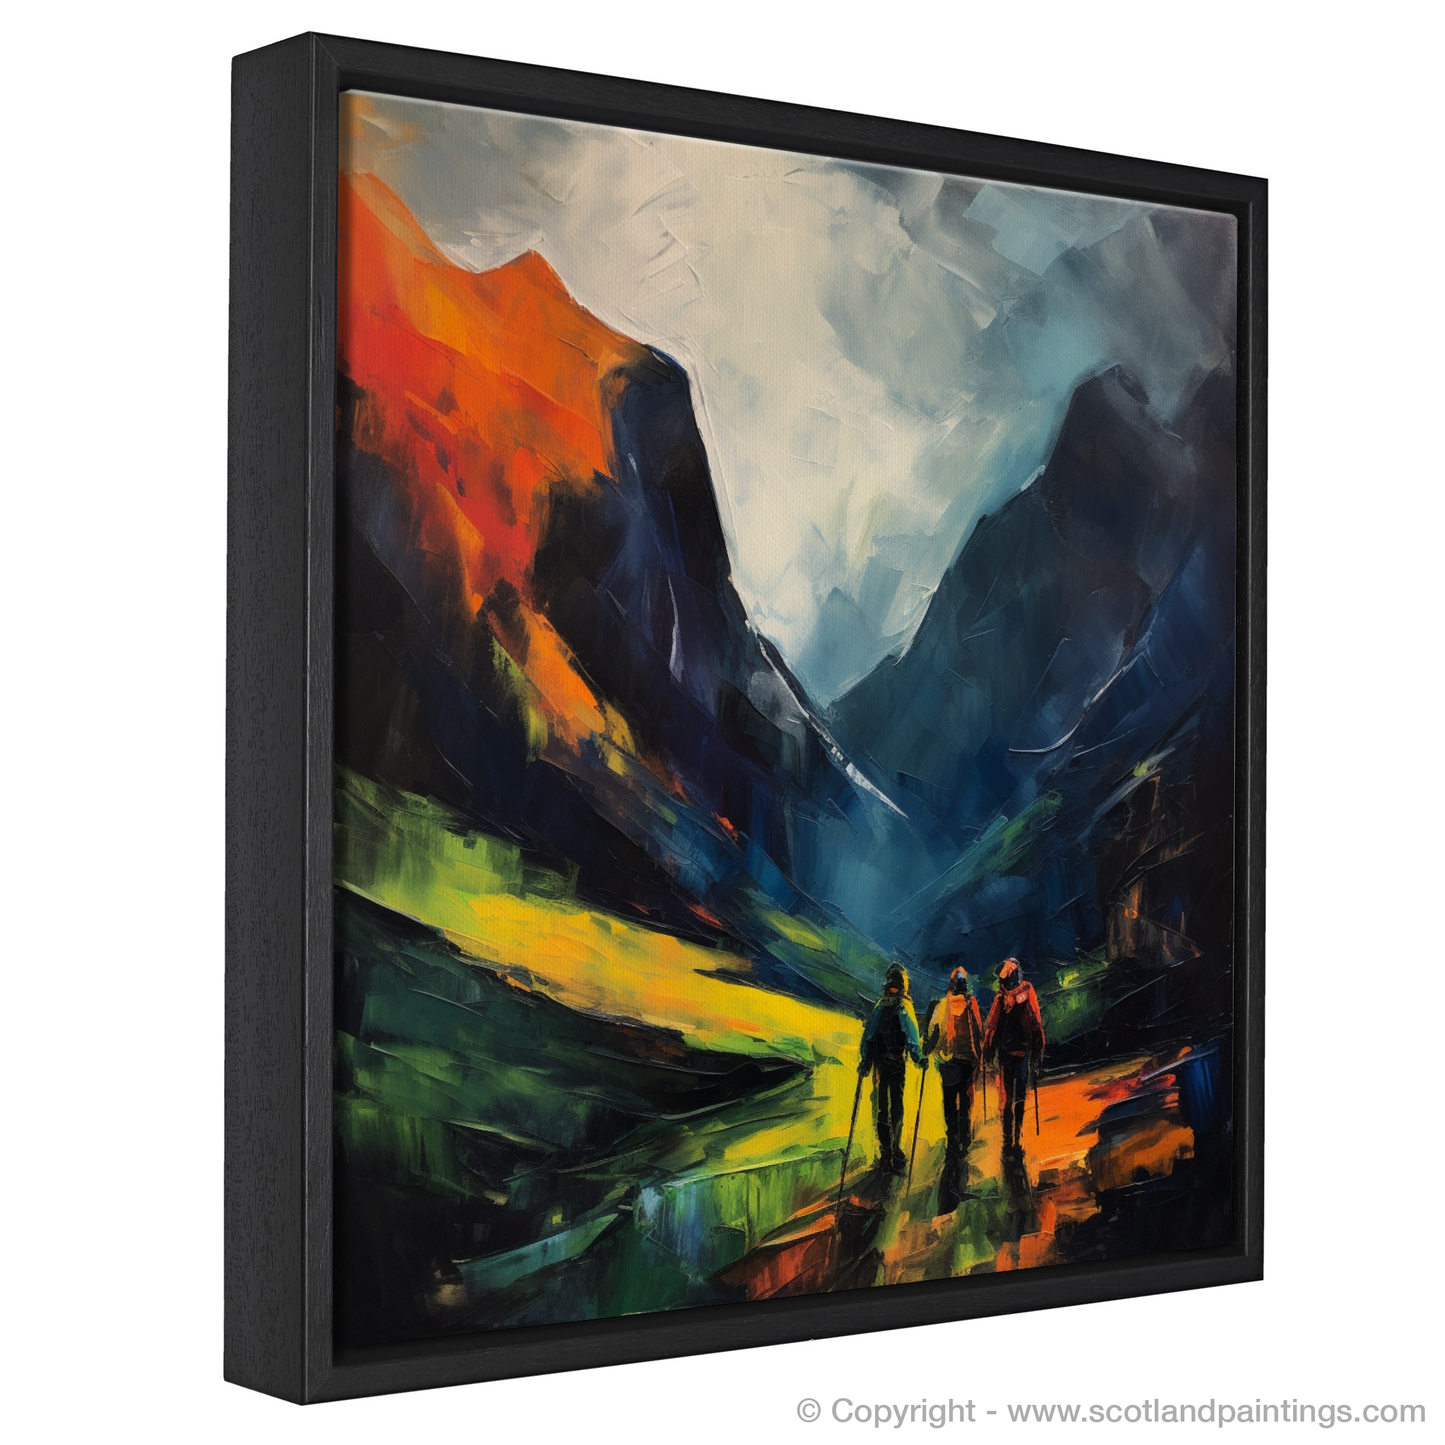 Painting and Art Print of Hikers in Glencoe entitled "Hikers in Glencoe: A Fauvist Ode to Scottish Wilderness".